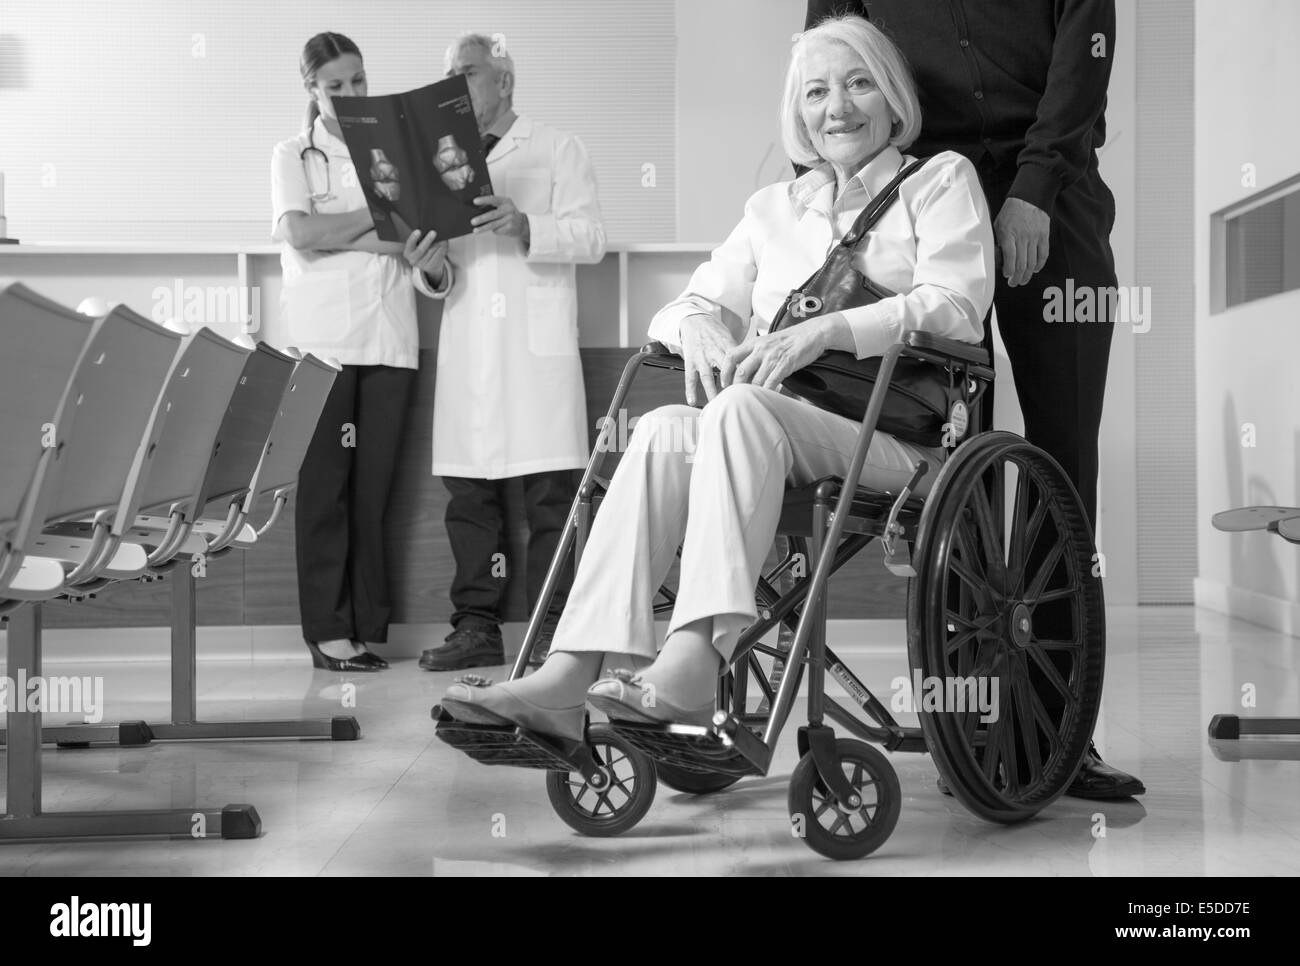 Mature woman in wheelchair in the hospital with her husband. Doctors analyzing scan in background. Stock Photo